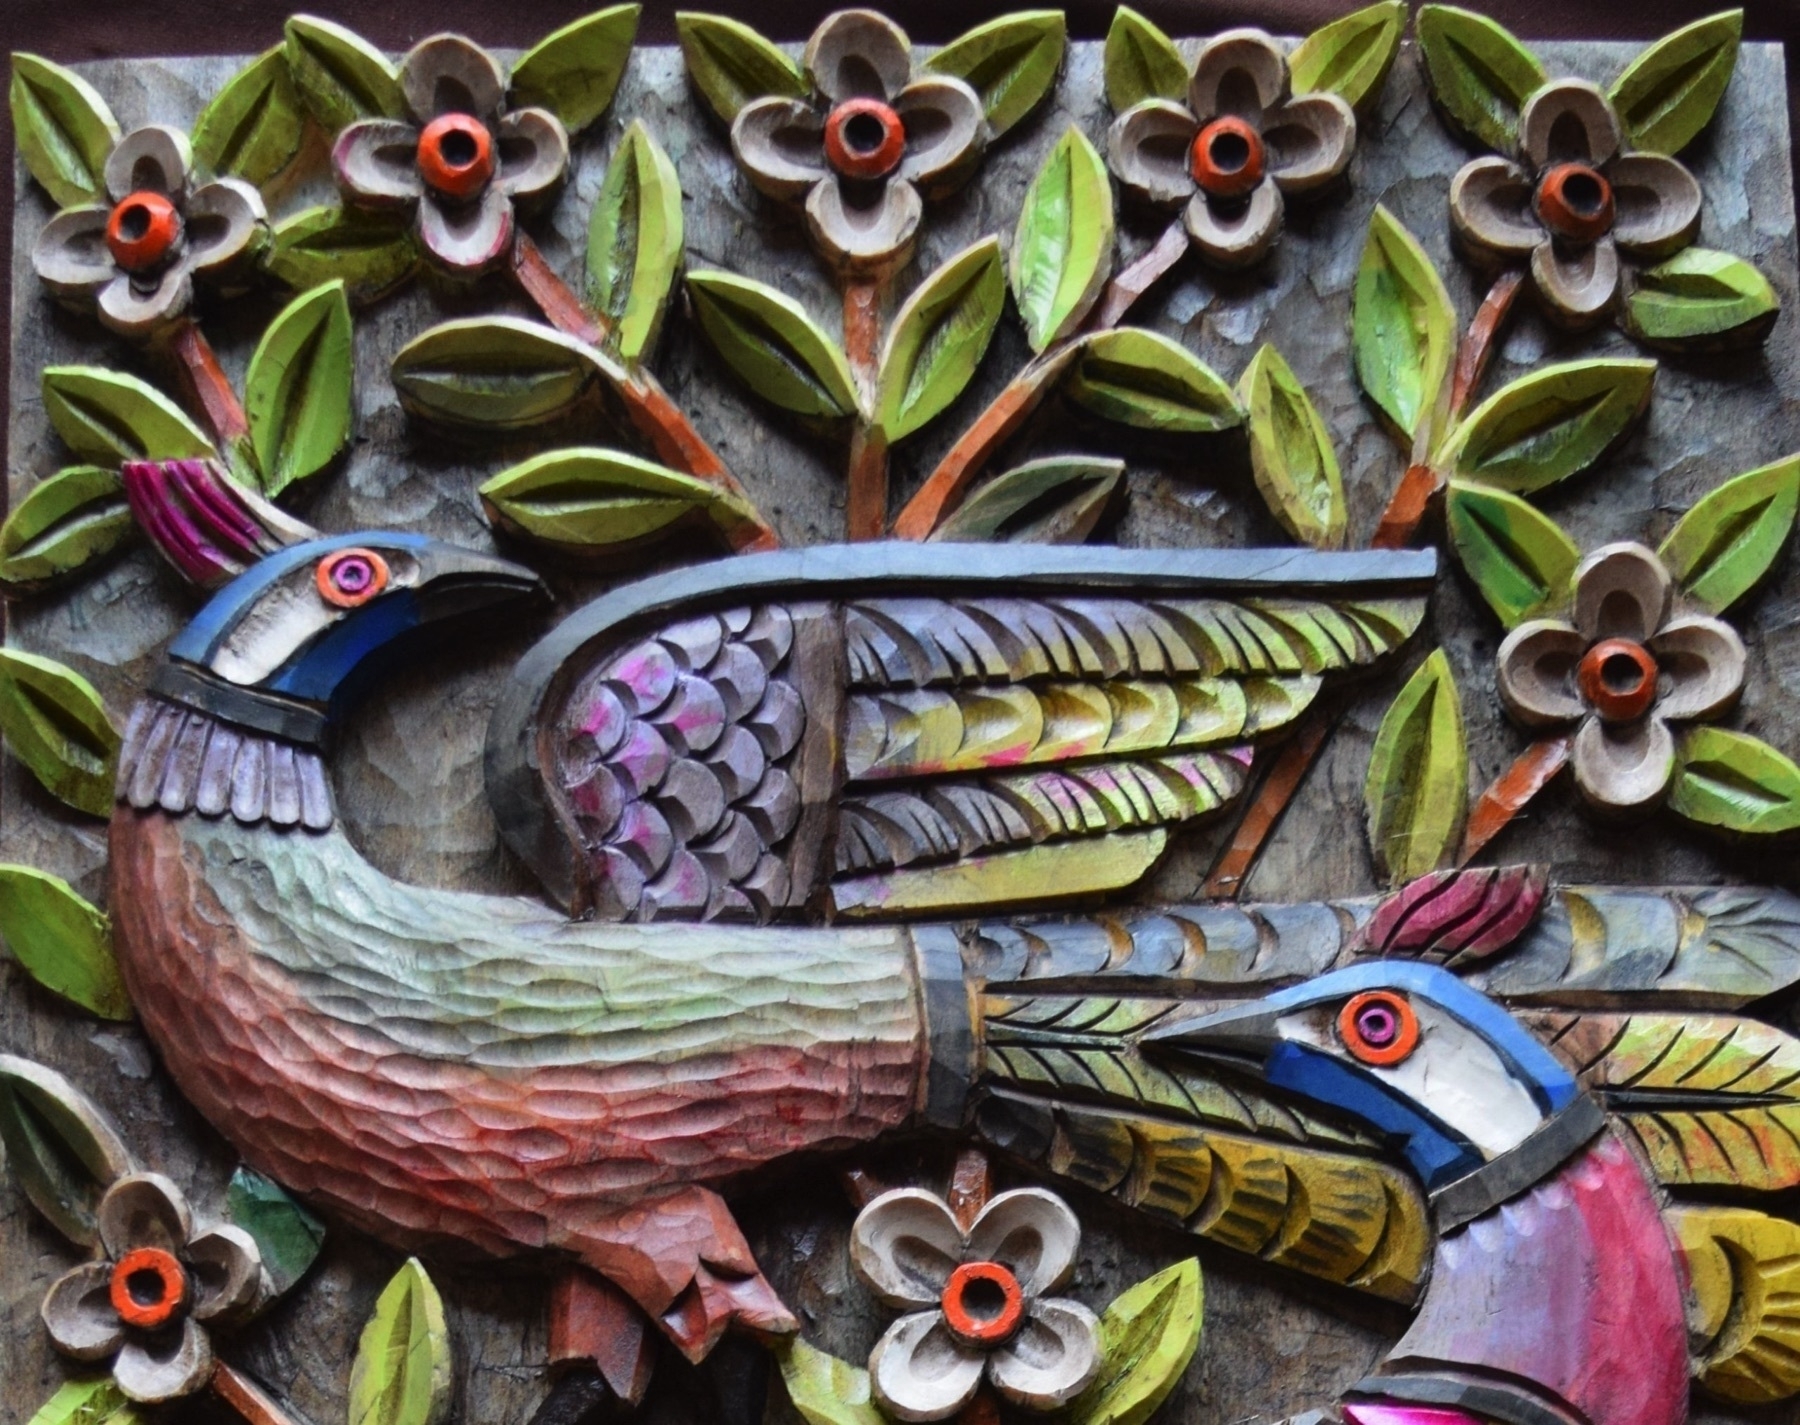 Detail of relief wood carving of birds against foliage, painted in bright blues, oranges, and greens.